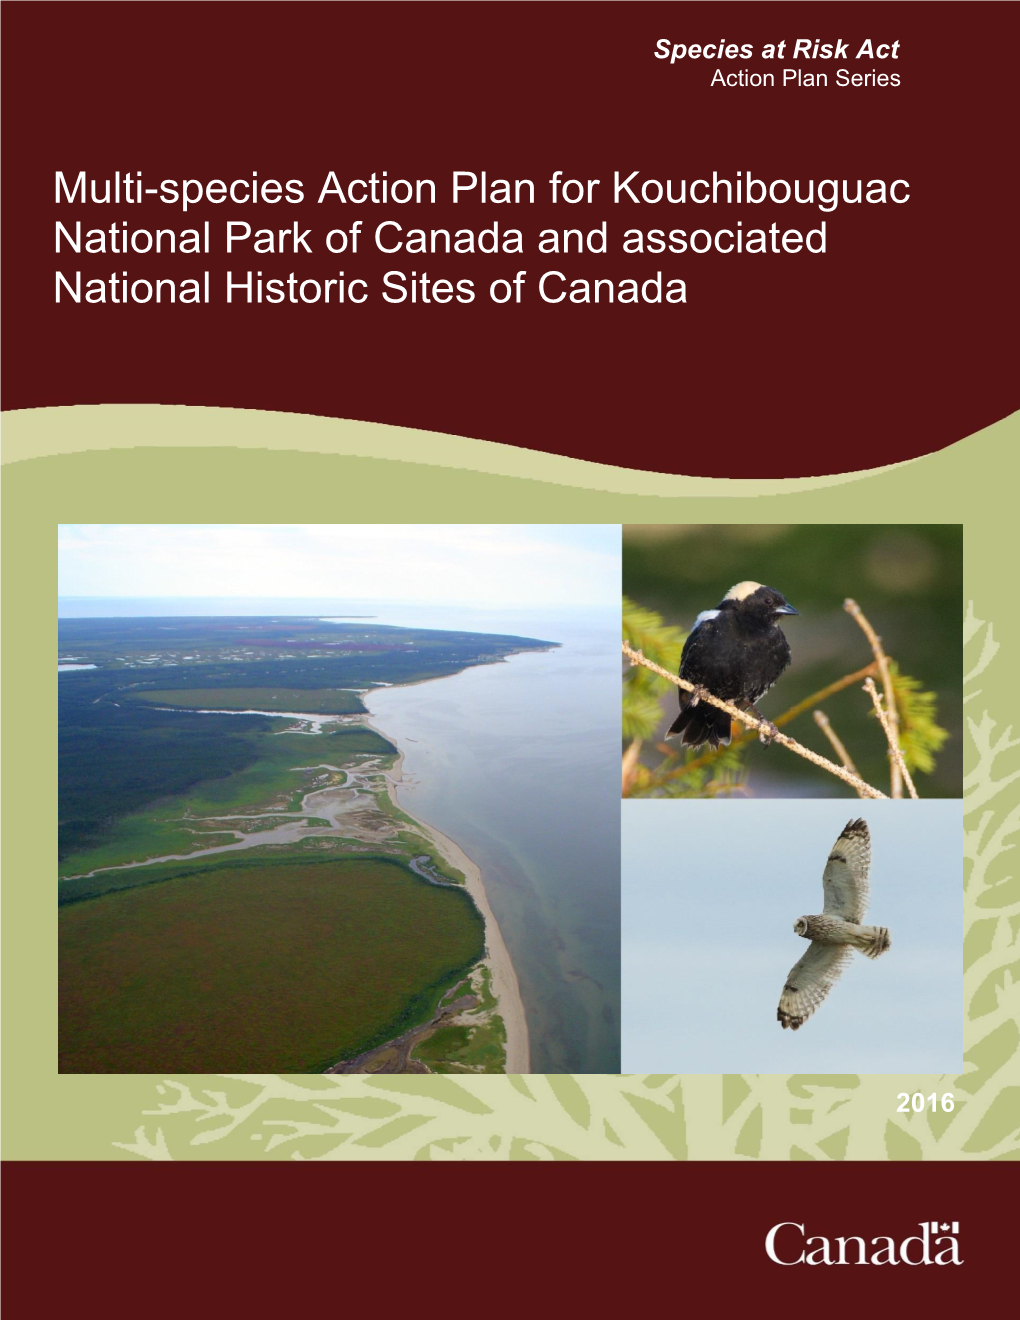 Multi-Species Action Plan for Kouchibouguac National Park of Canada and Associated National Historic Sites of Canada